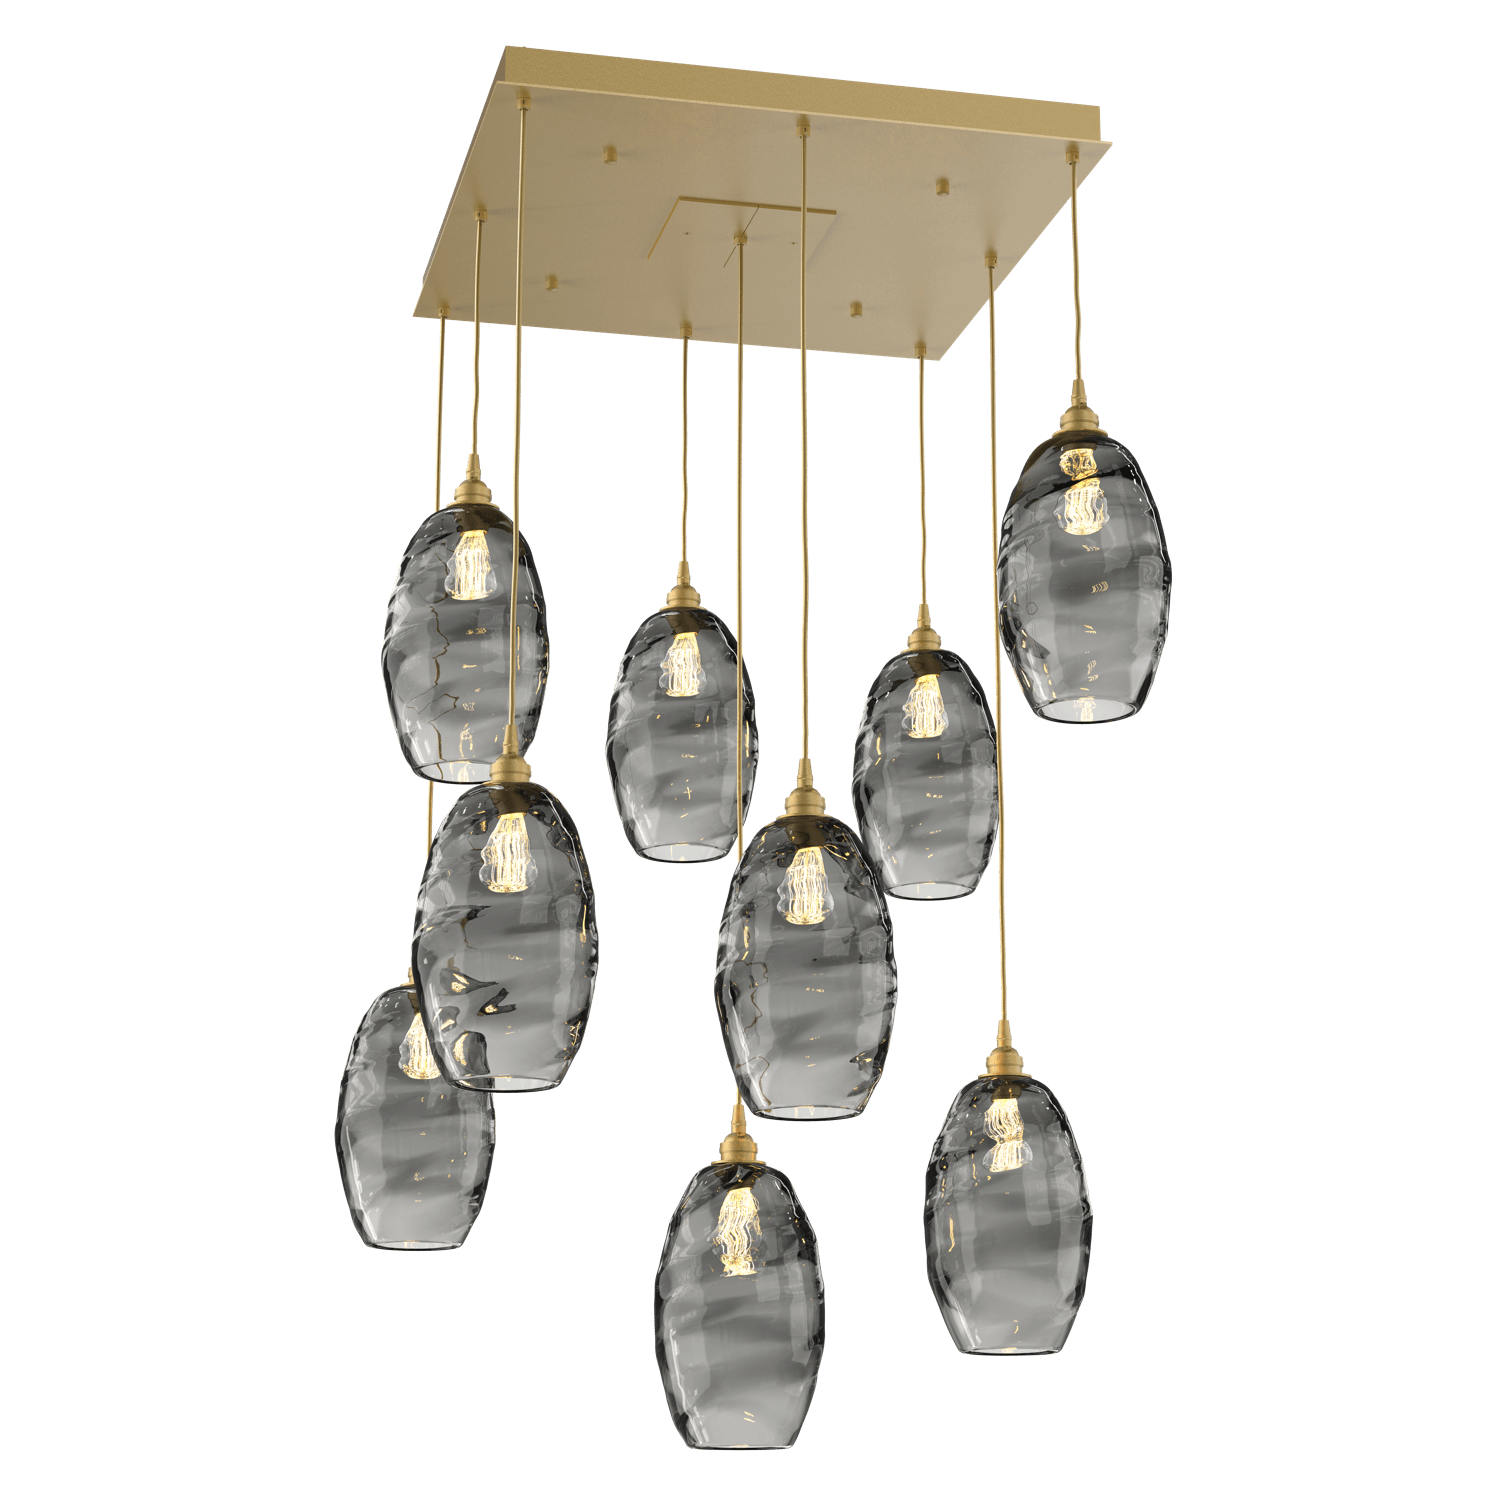 CHB0035-09-GB-OS-Hammerton-Studio-Optic-Blown-Glass-Elisse-9-light-square-pendant-chandelier-with-gilded-brass-finish-and-optic-smoke-blown-glass-shades-and-incandescent-lamping